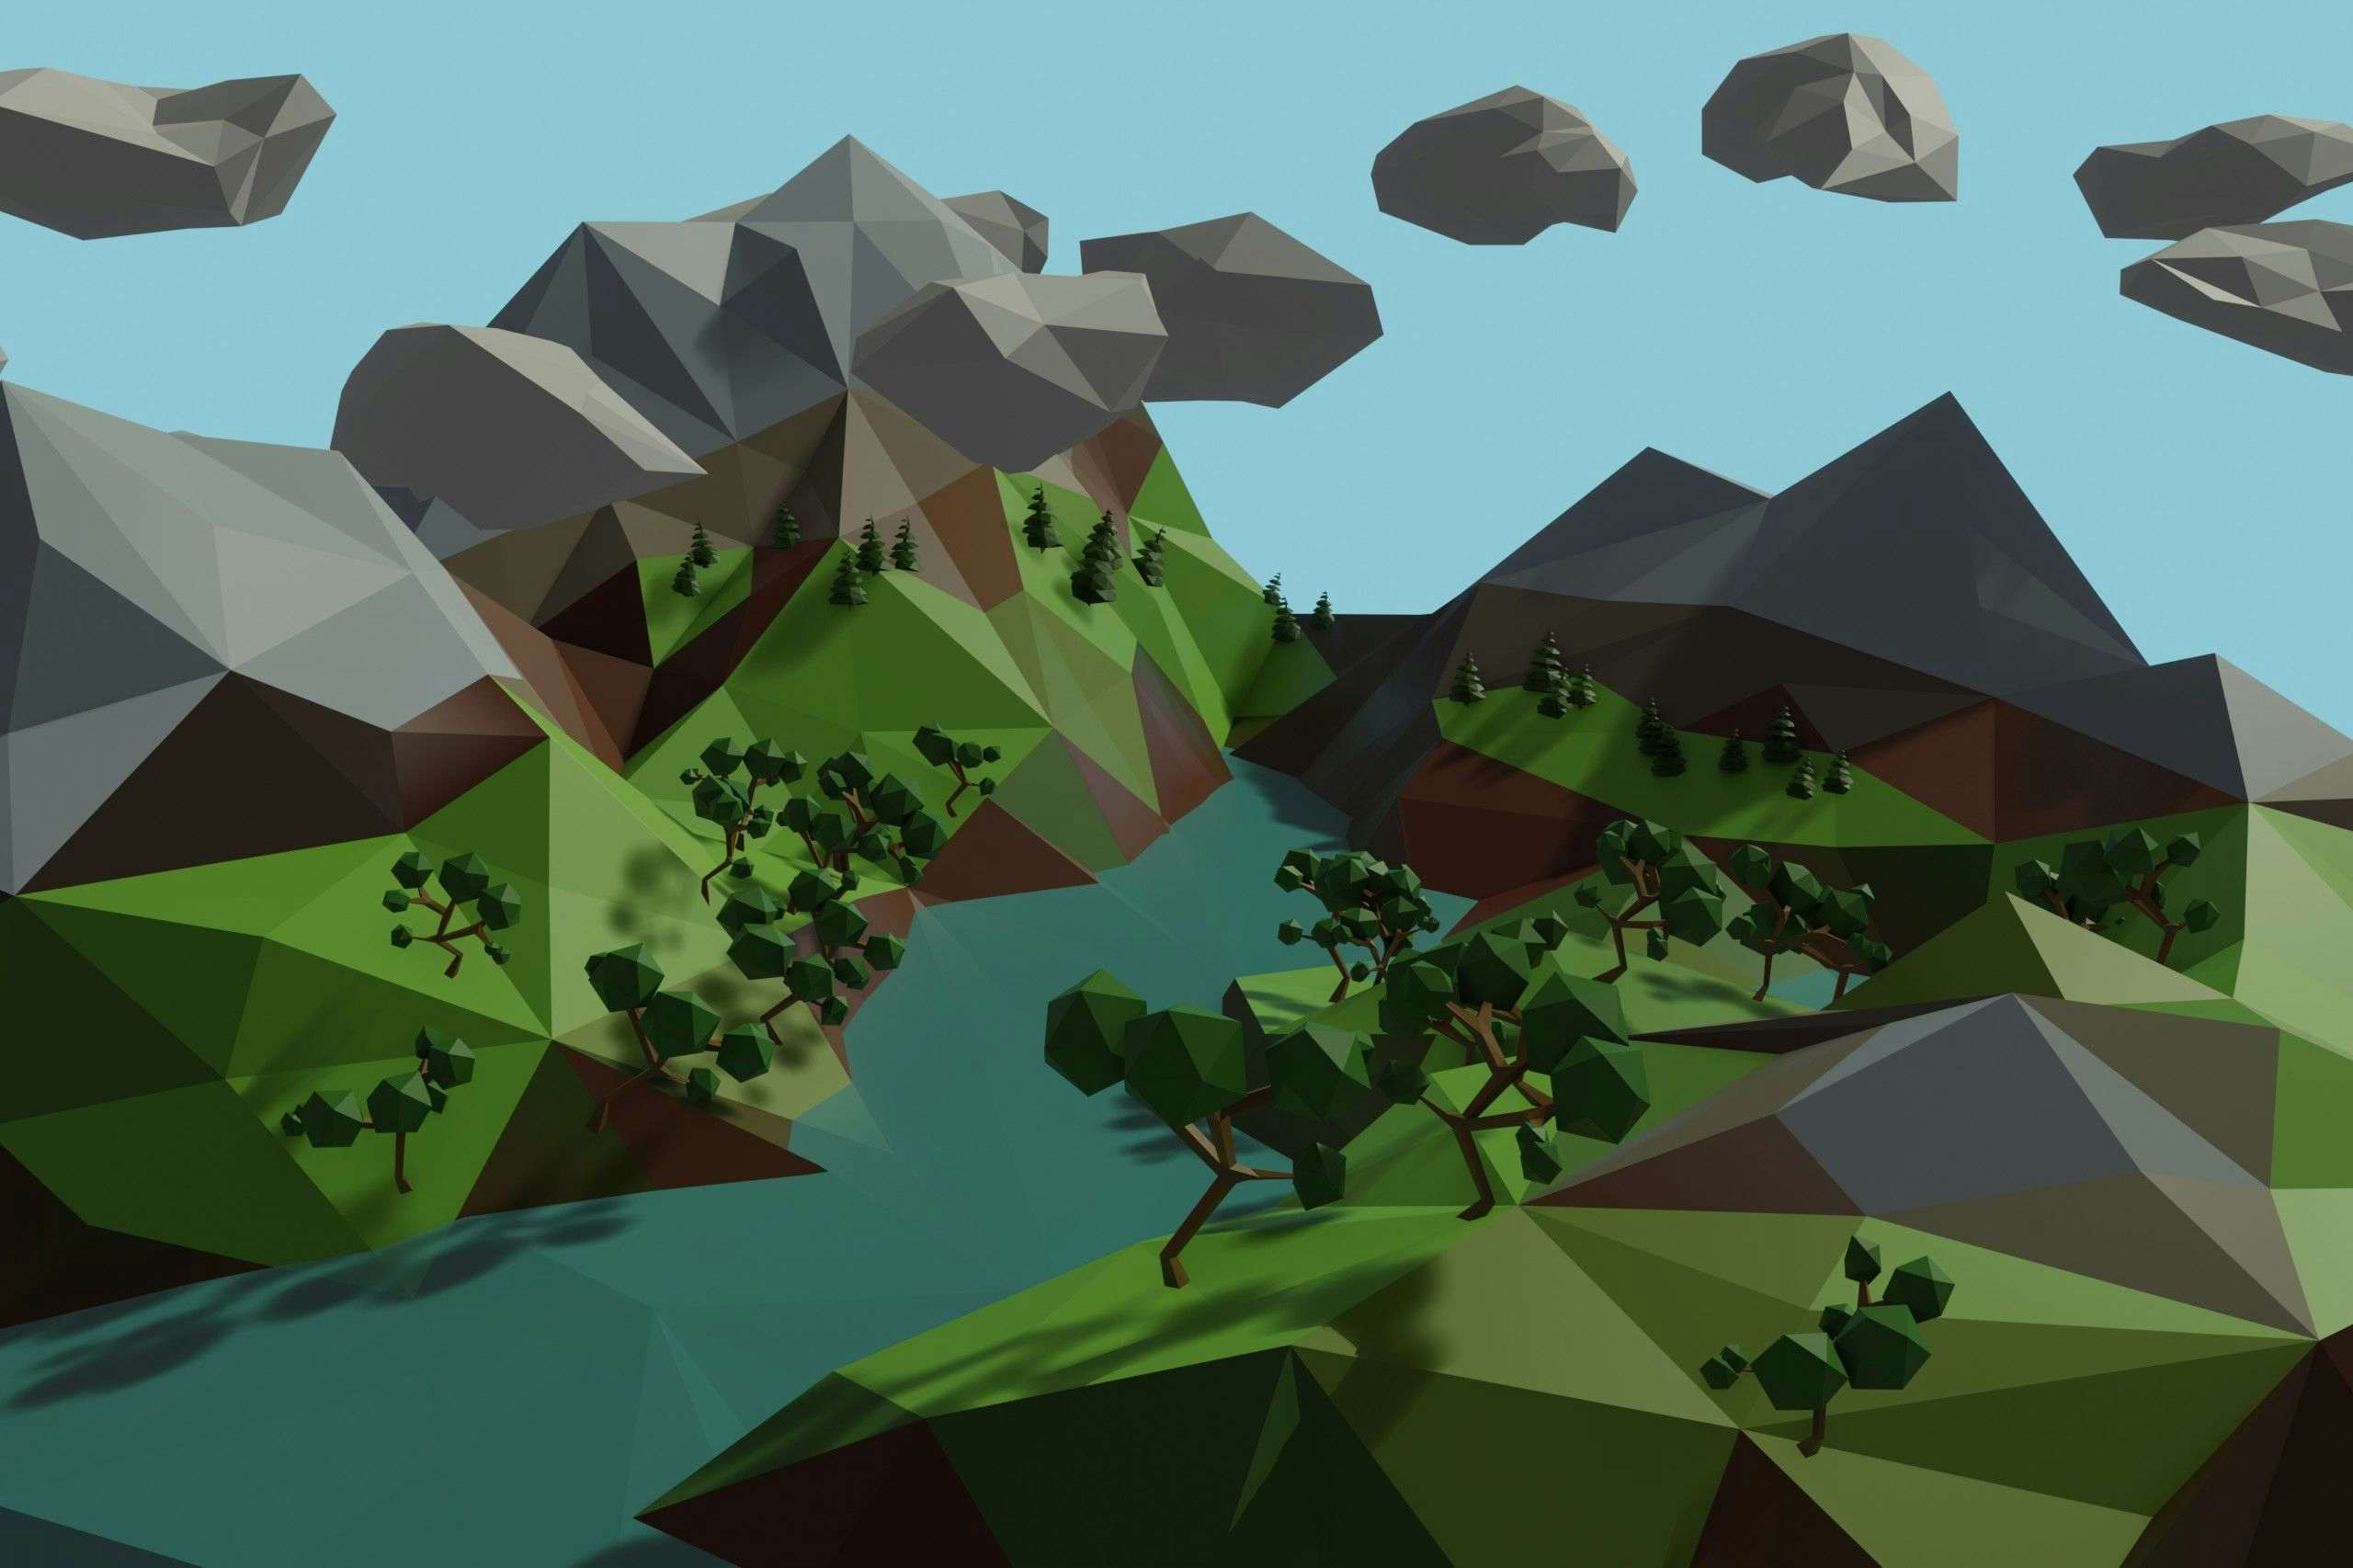 Low poly 3D landscape scene created in Blender by Xavier Wendling